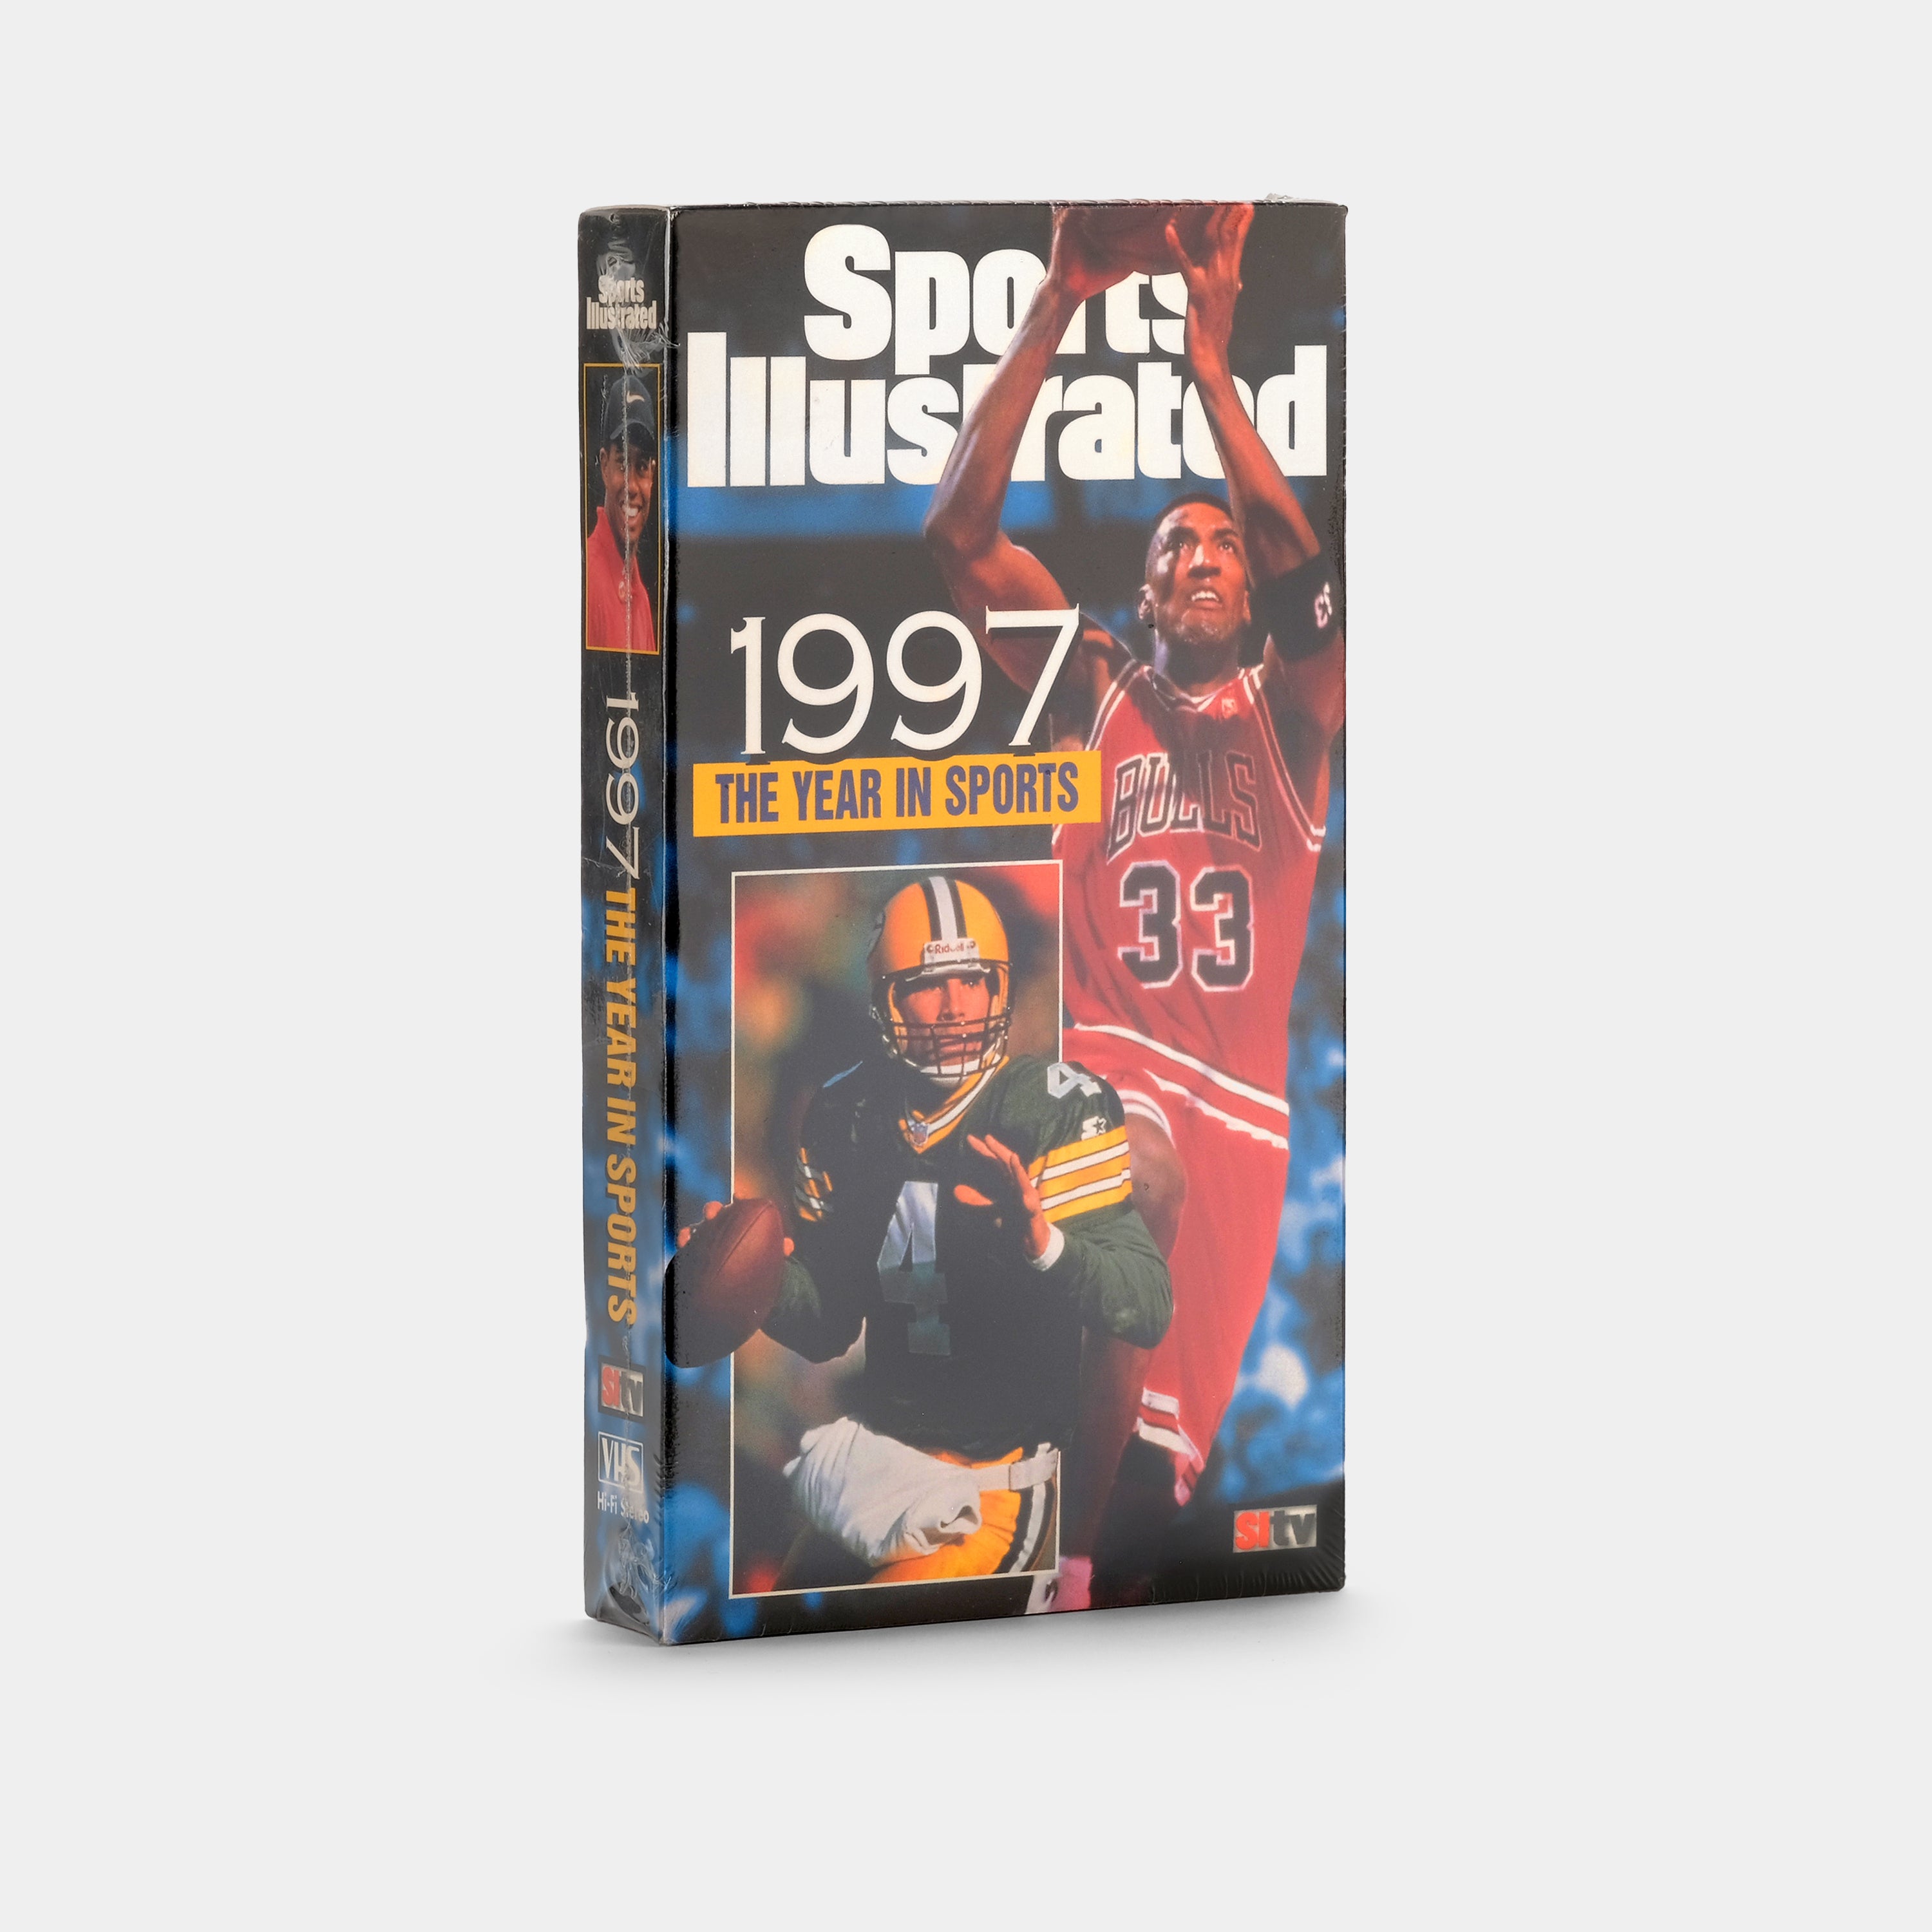 Sports Illustrated: 1997 The Year in Sports (Sealed) VHS Tape